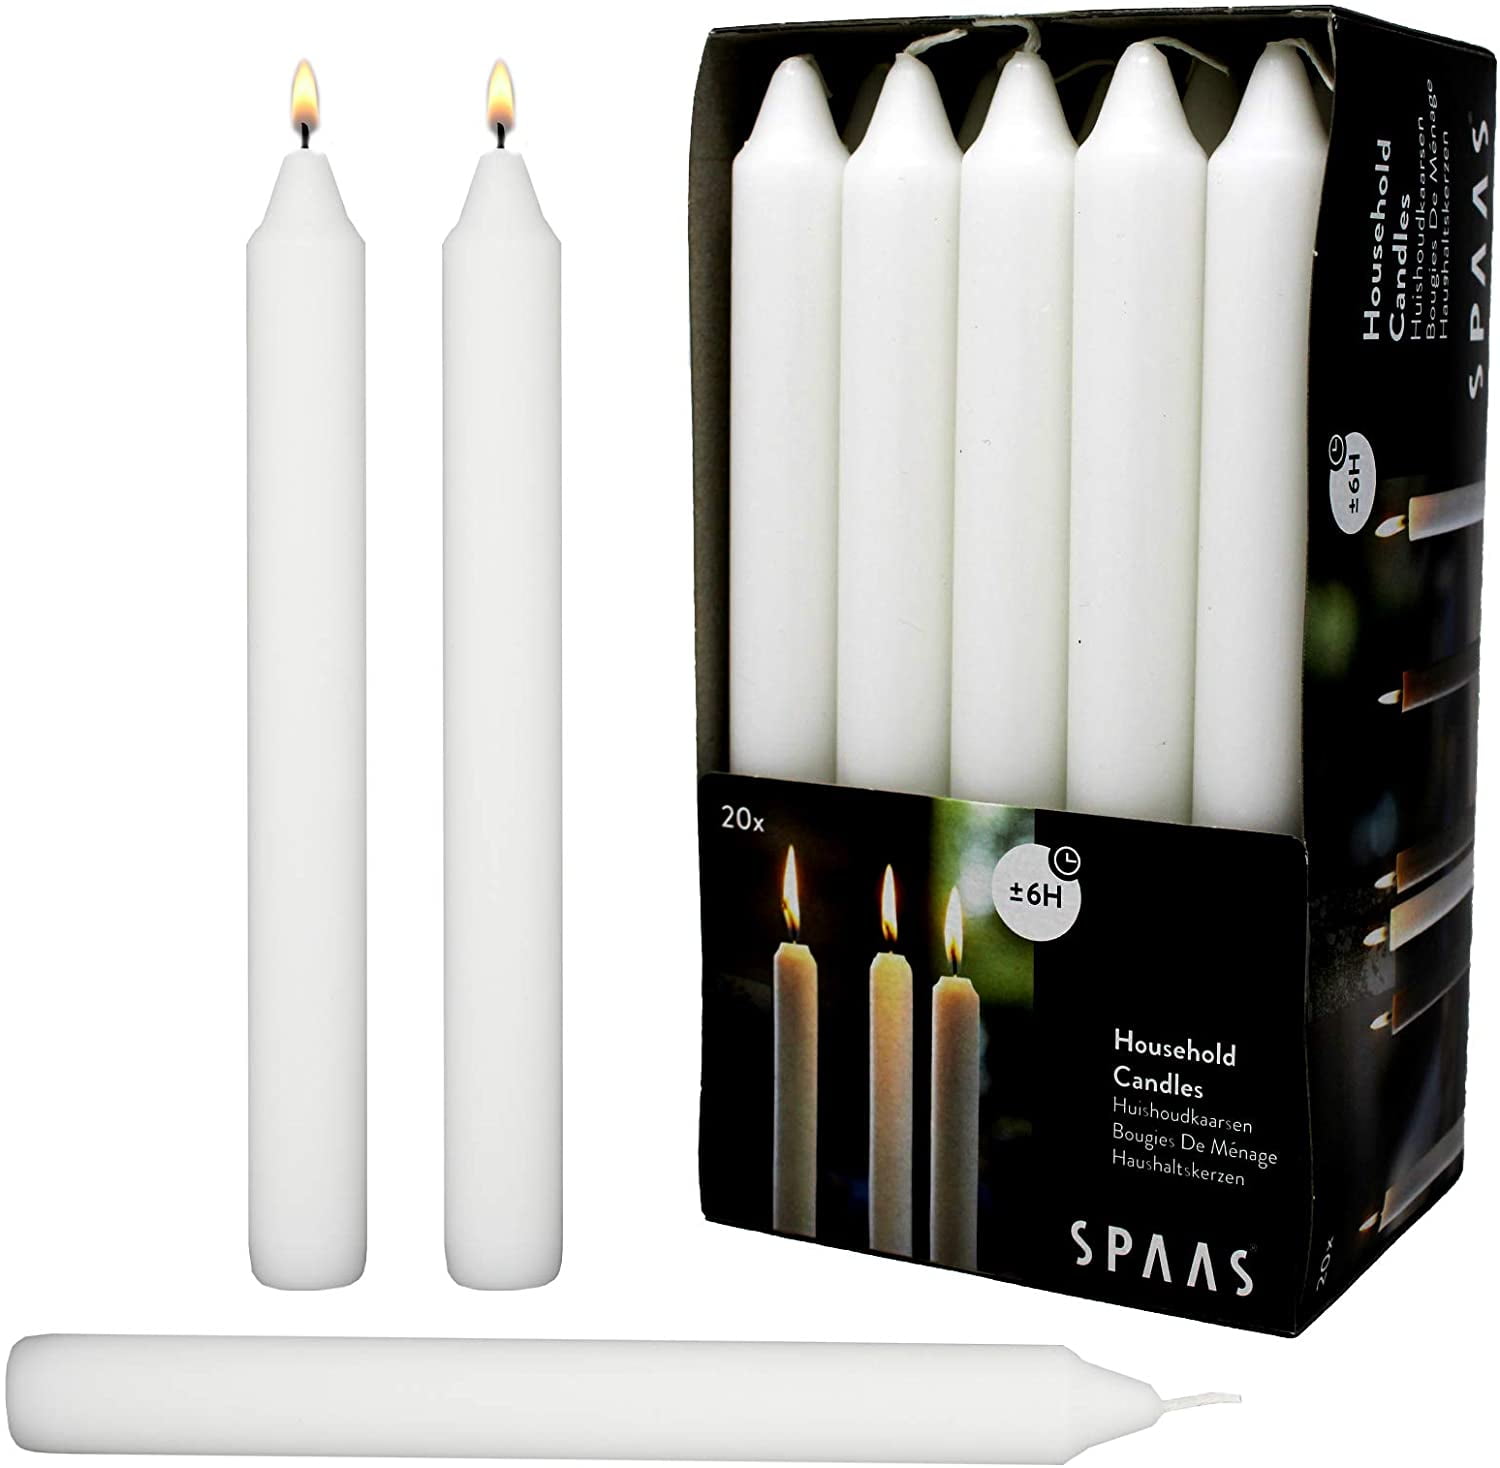 5 SMALL WHITE SCROLL BOXES WEDDINGS CANDLES GIFTS 